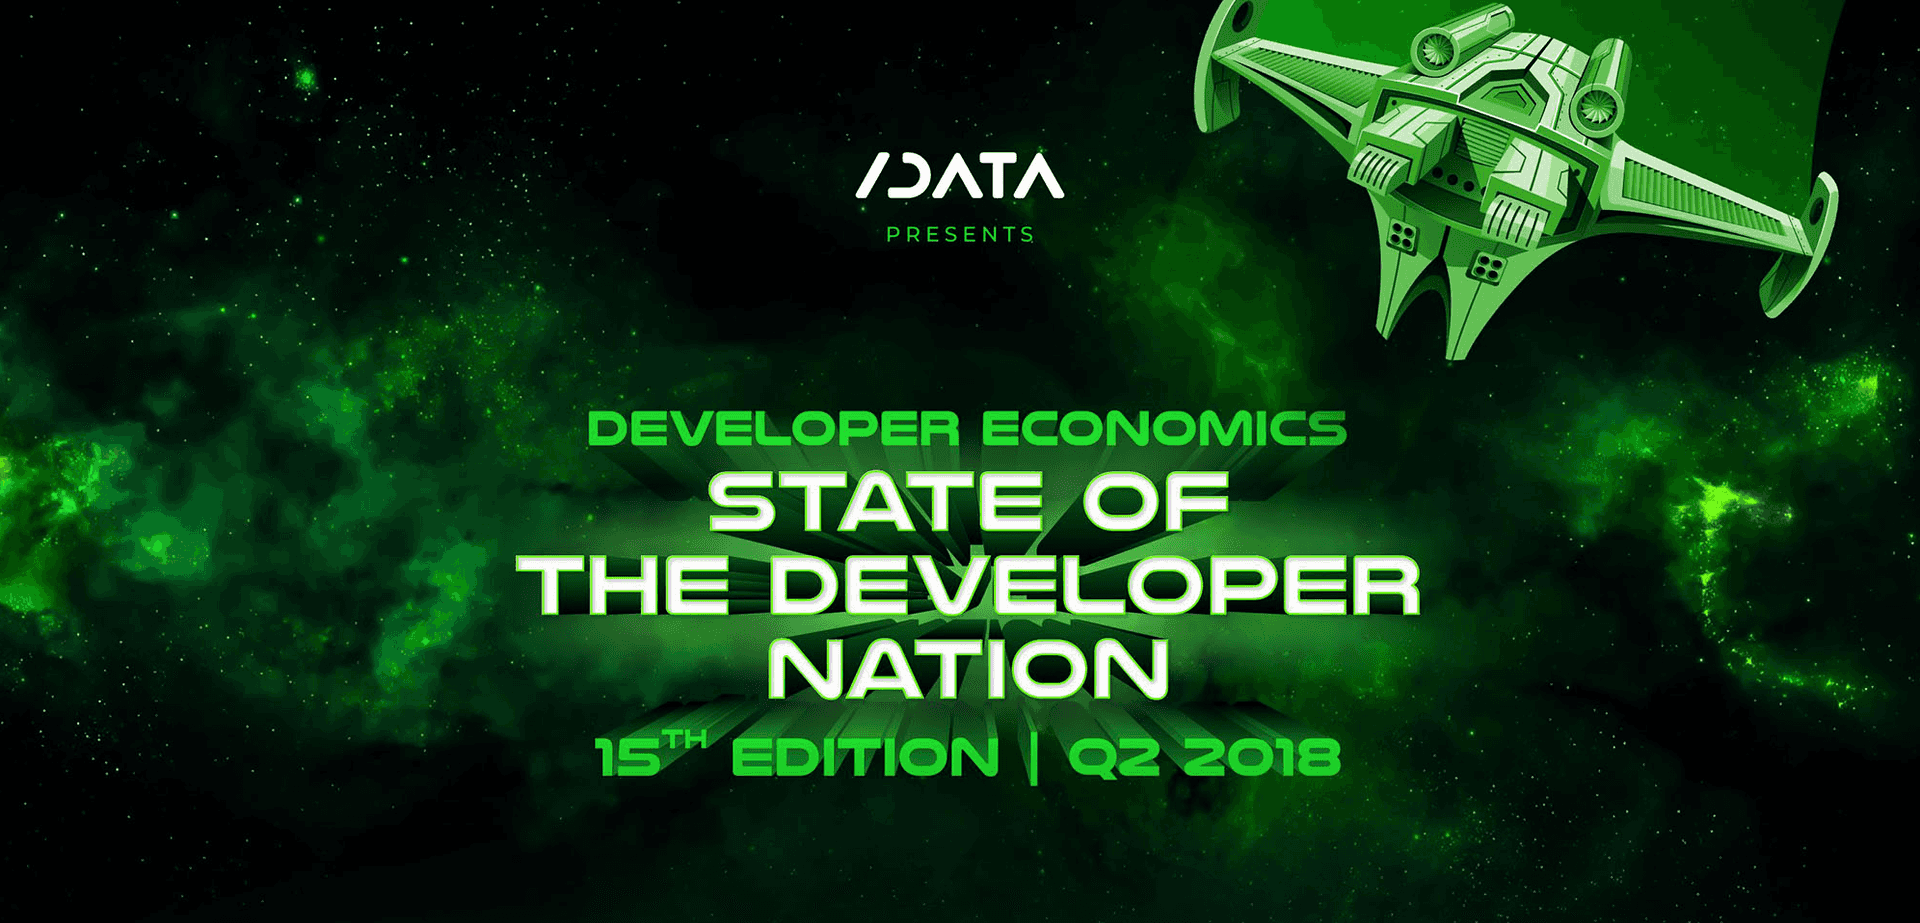 State of the Developer Nation 15 edition